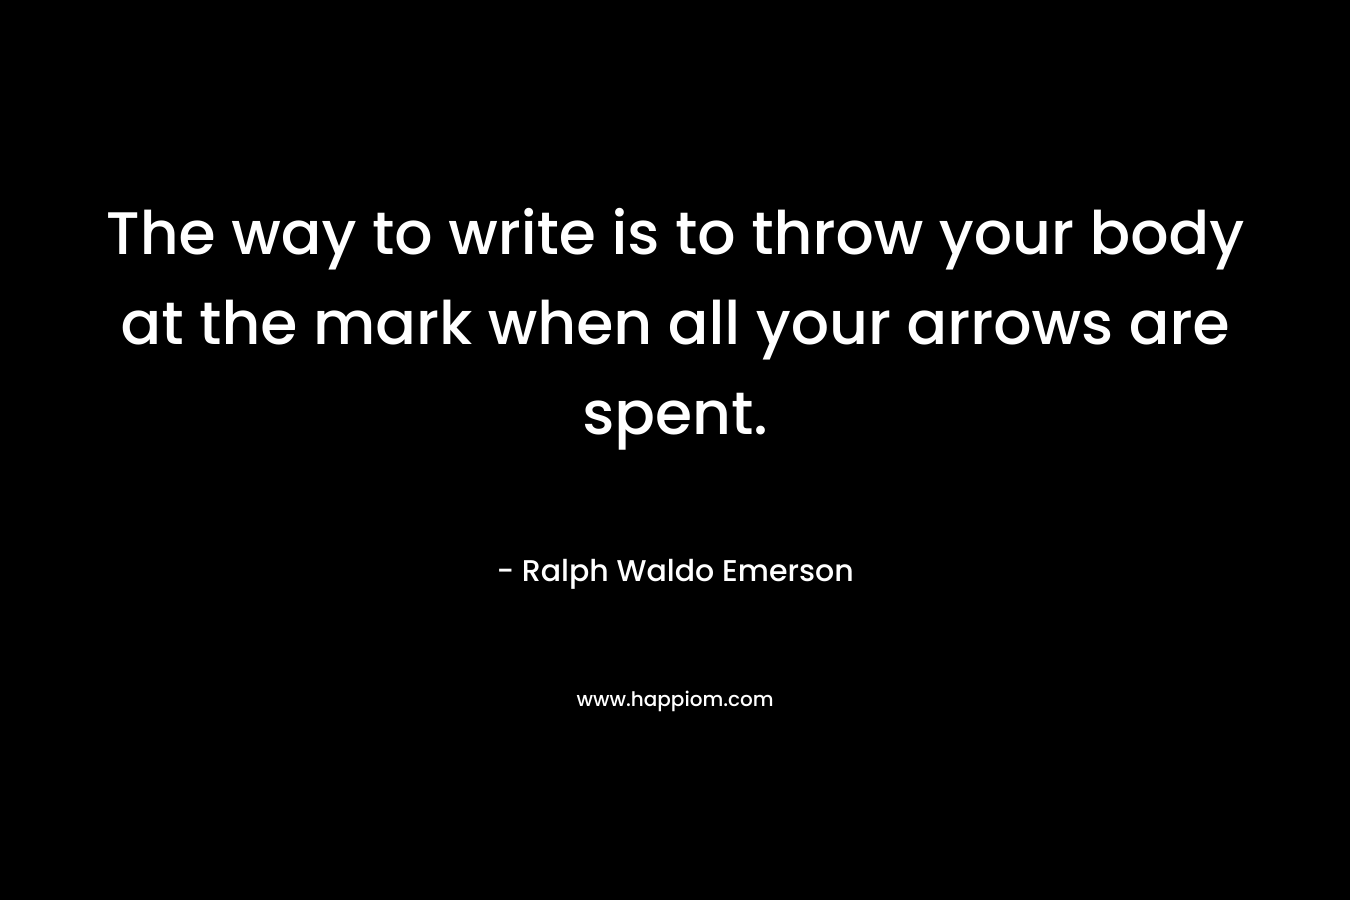 The way to write is to throw your body at the mark when all your arrows are spent. – Ralph Waldo Emerson